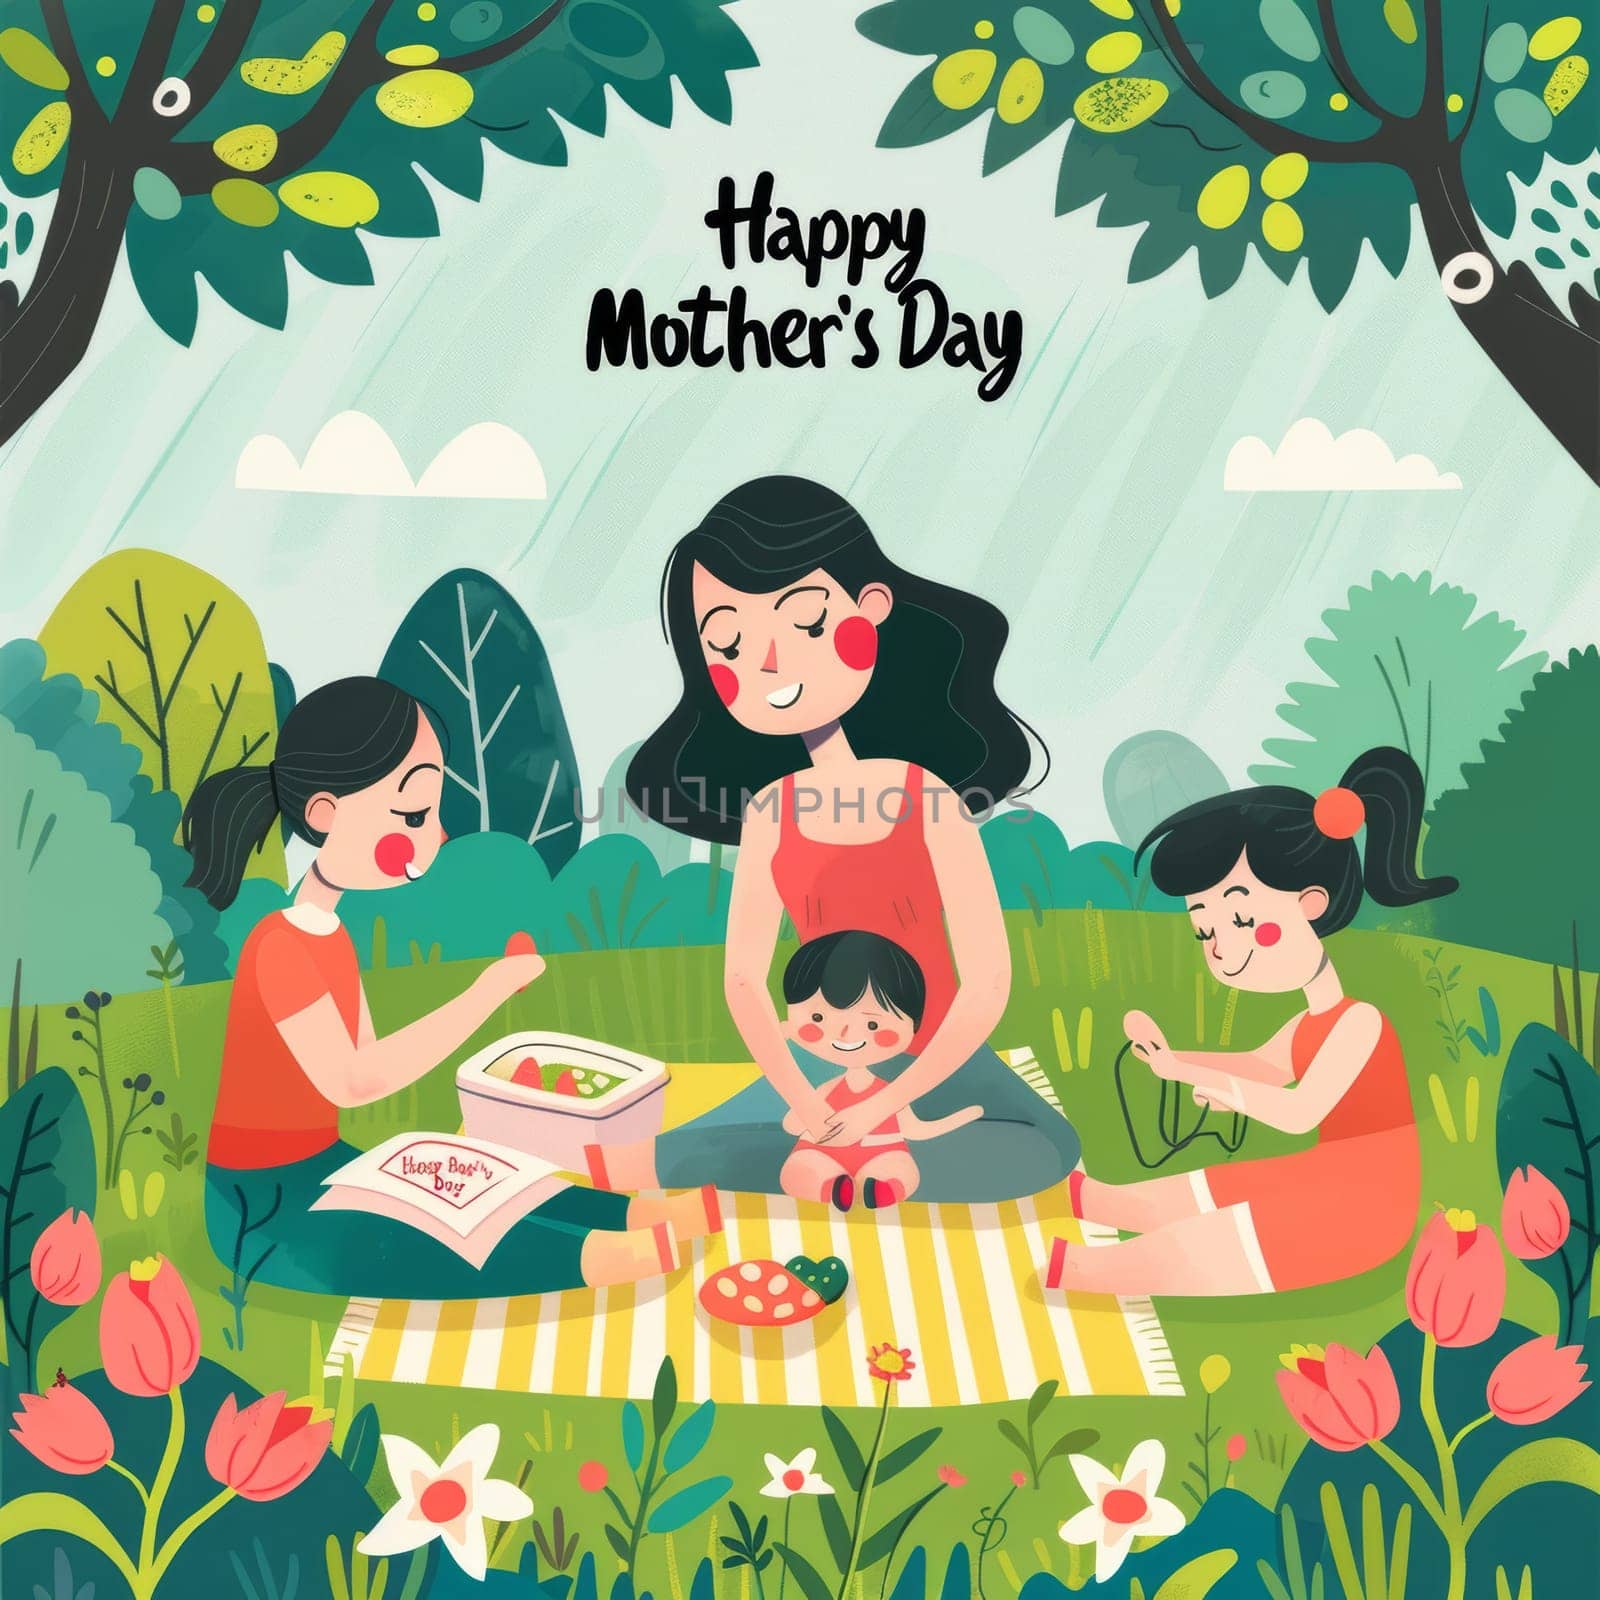 A delightful image showcasing a mother with her children engaged in a cheerful picnic, celebrating Mothers Day amidst a field of tulips. by sfinks